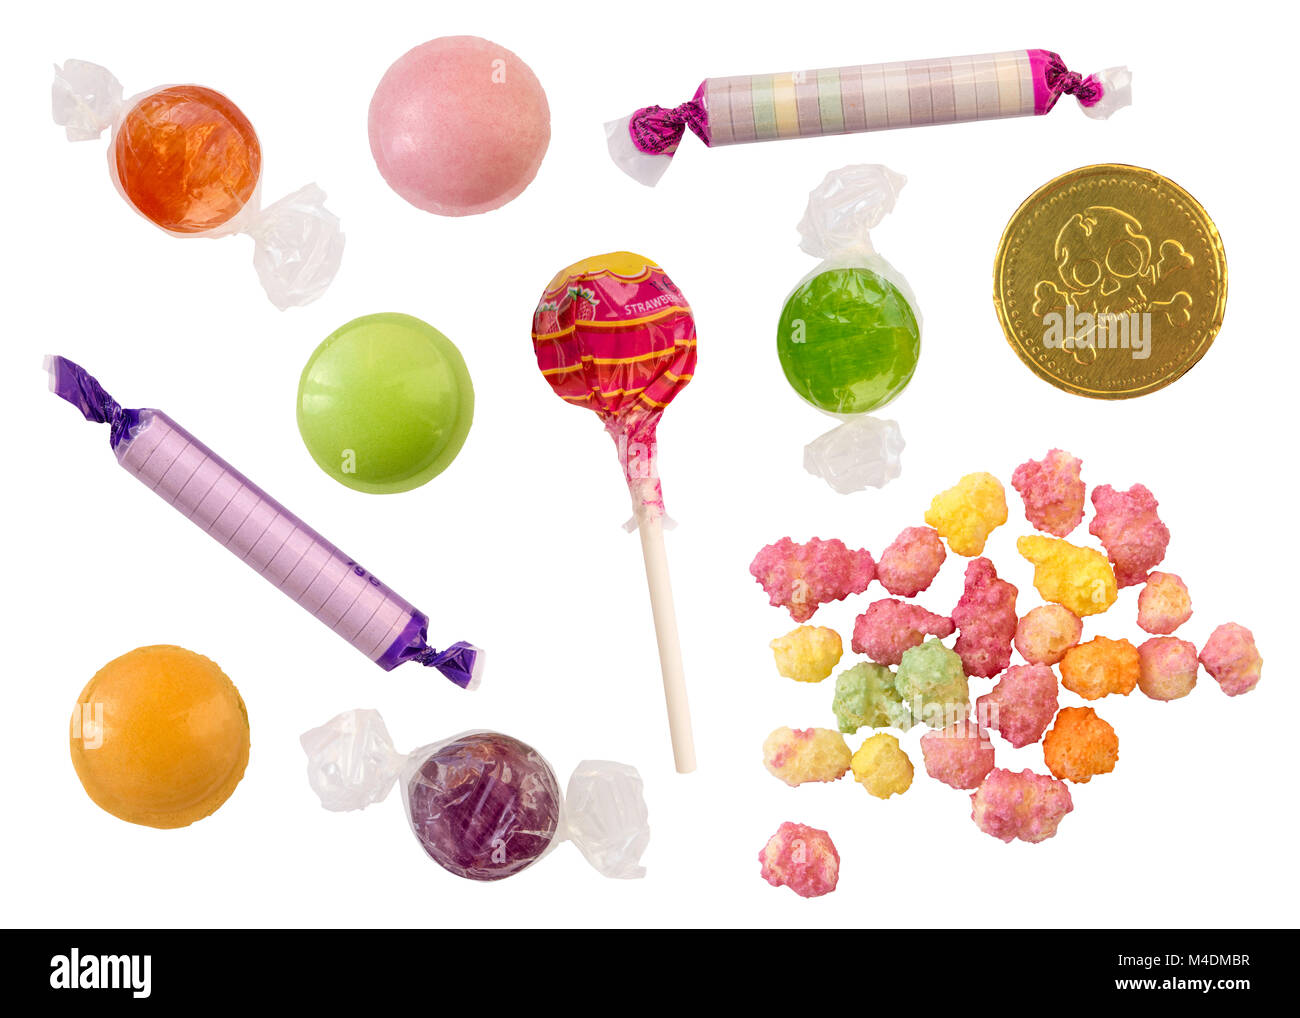 Isolated Candy Selection Stock Photo